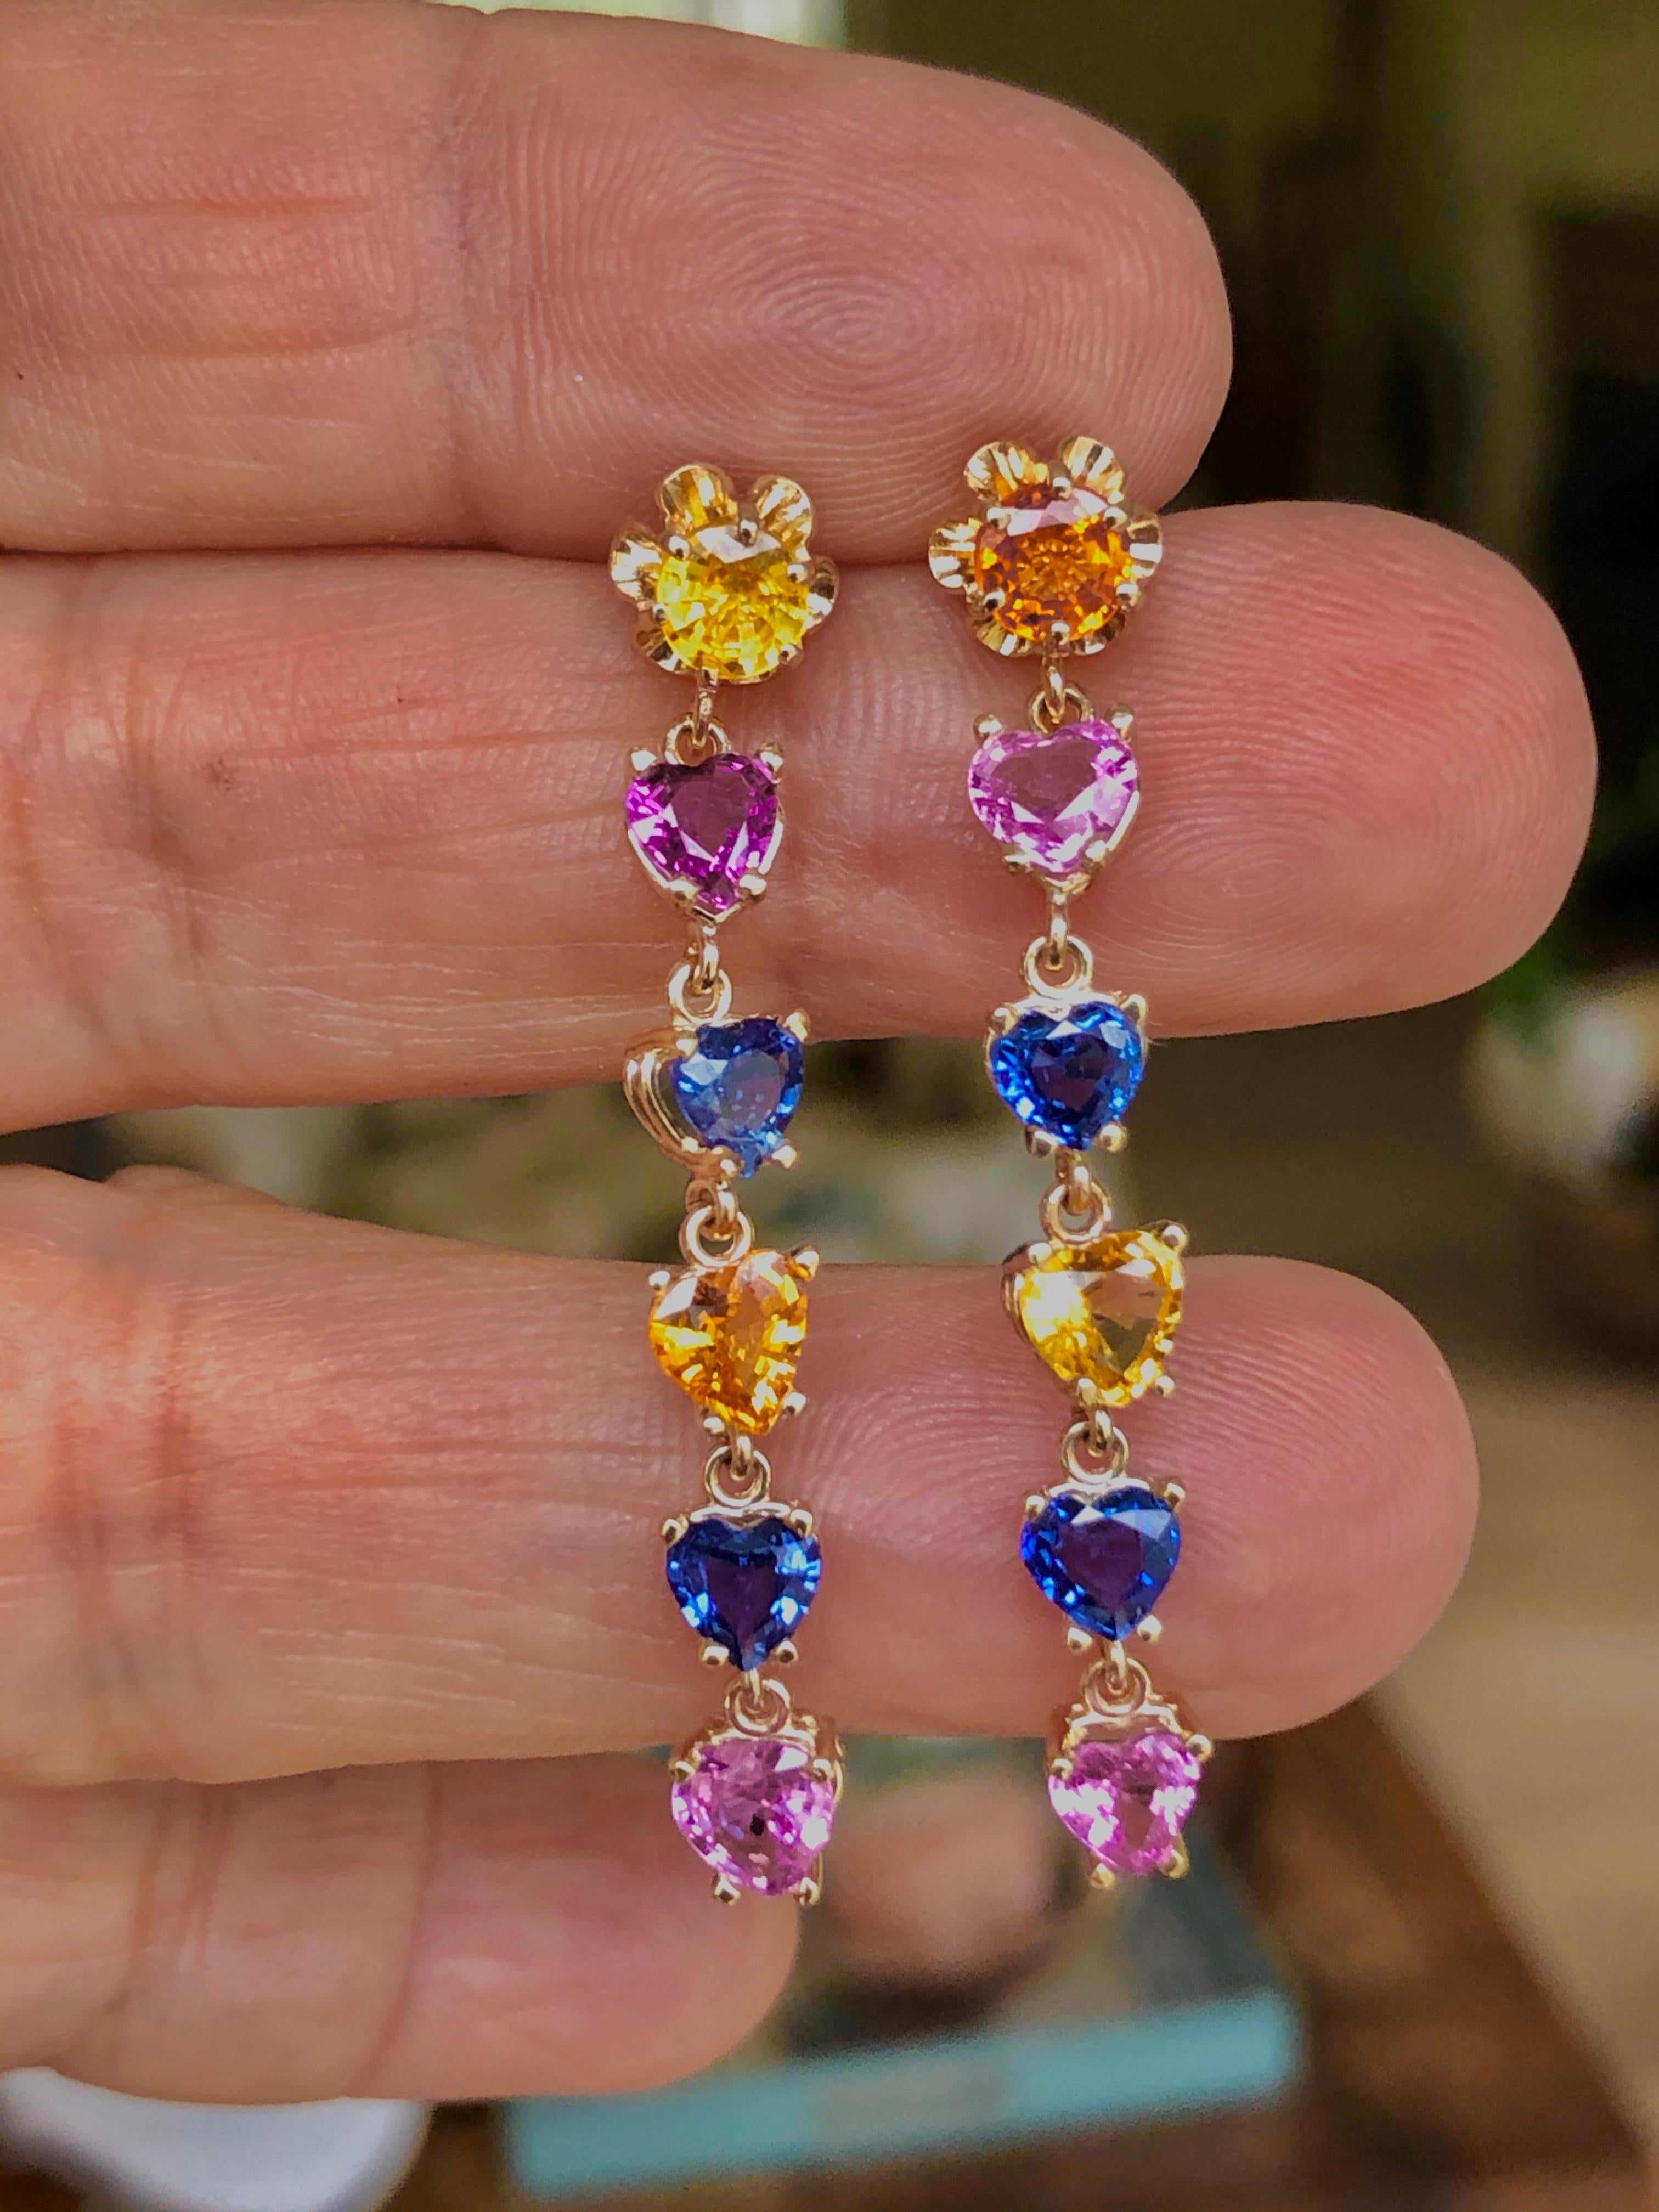  MultiColor Sapphires heart cut six for earring, stunning (very much IN Style) natural high-quality sapphires very sparkling rainbow of color. The drop sapphire earrings are elegant yet playful and modern! The beautiful pair showcases 6.0 carats of